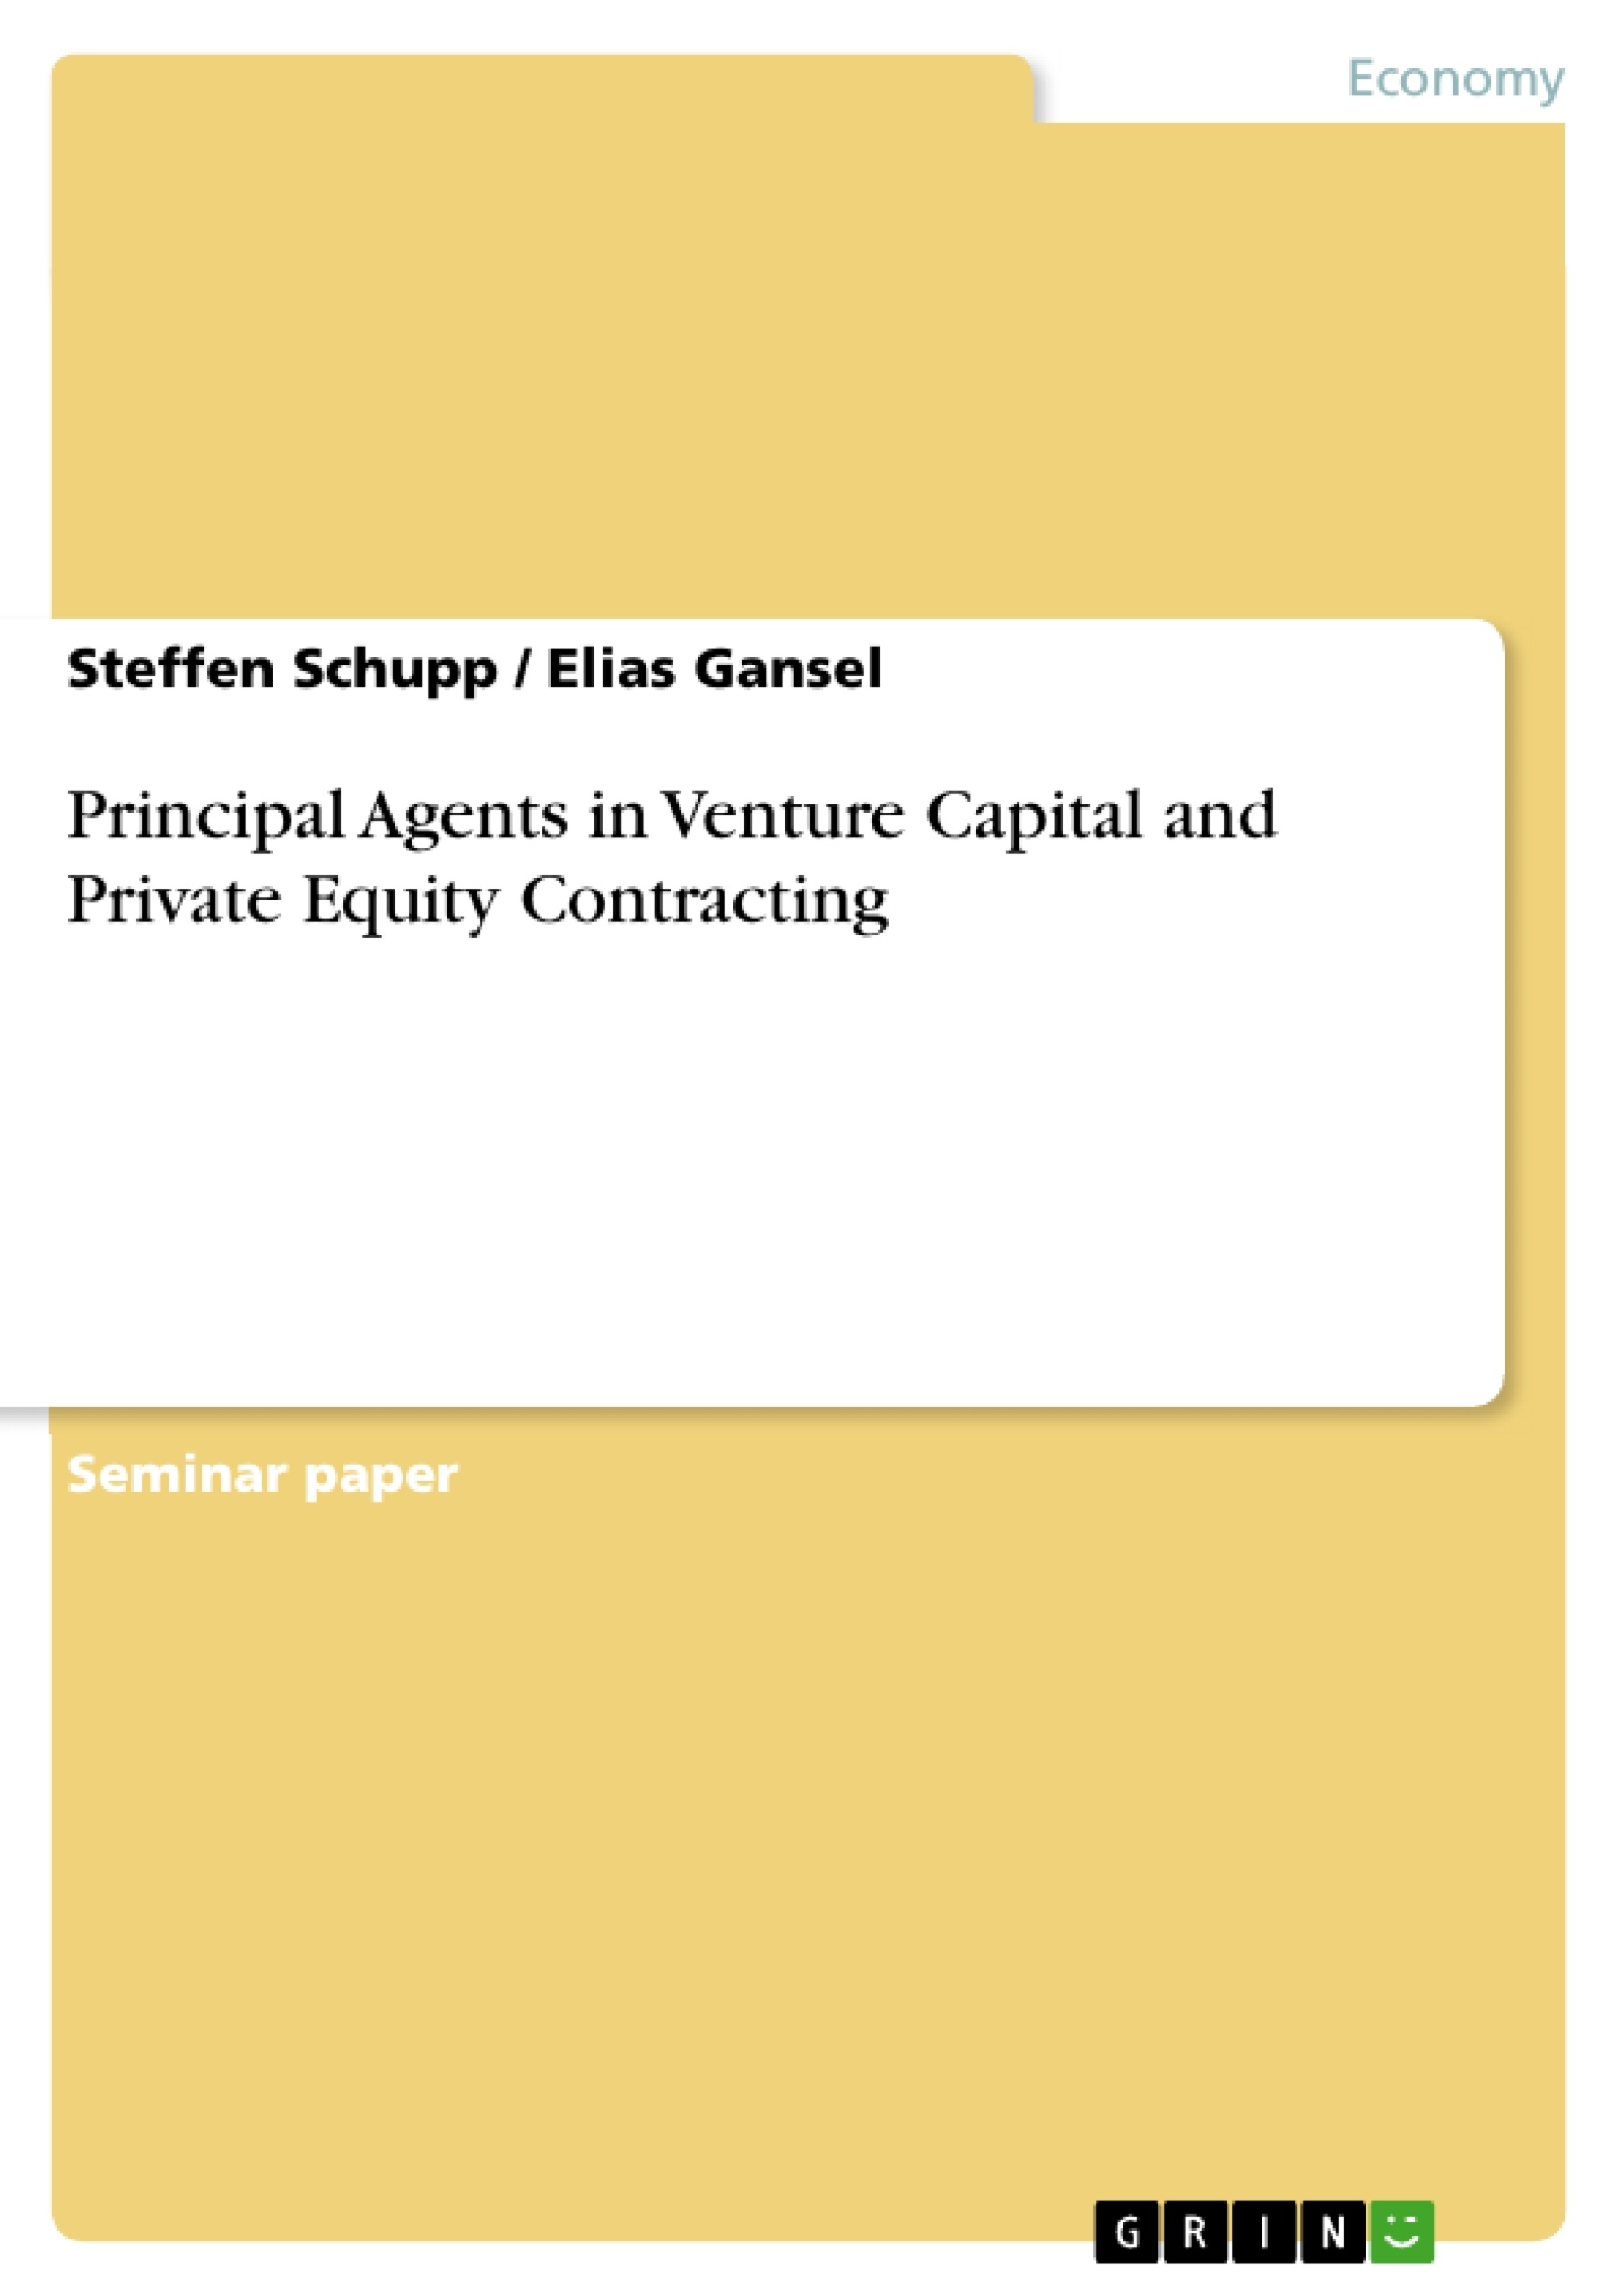 Title: Principal Agents in Venture Capital and Private Equity Contracting